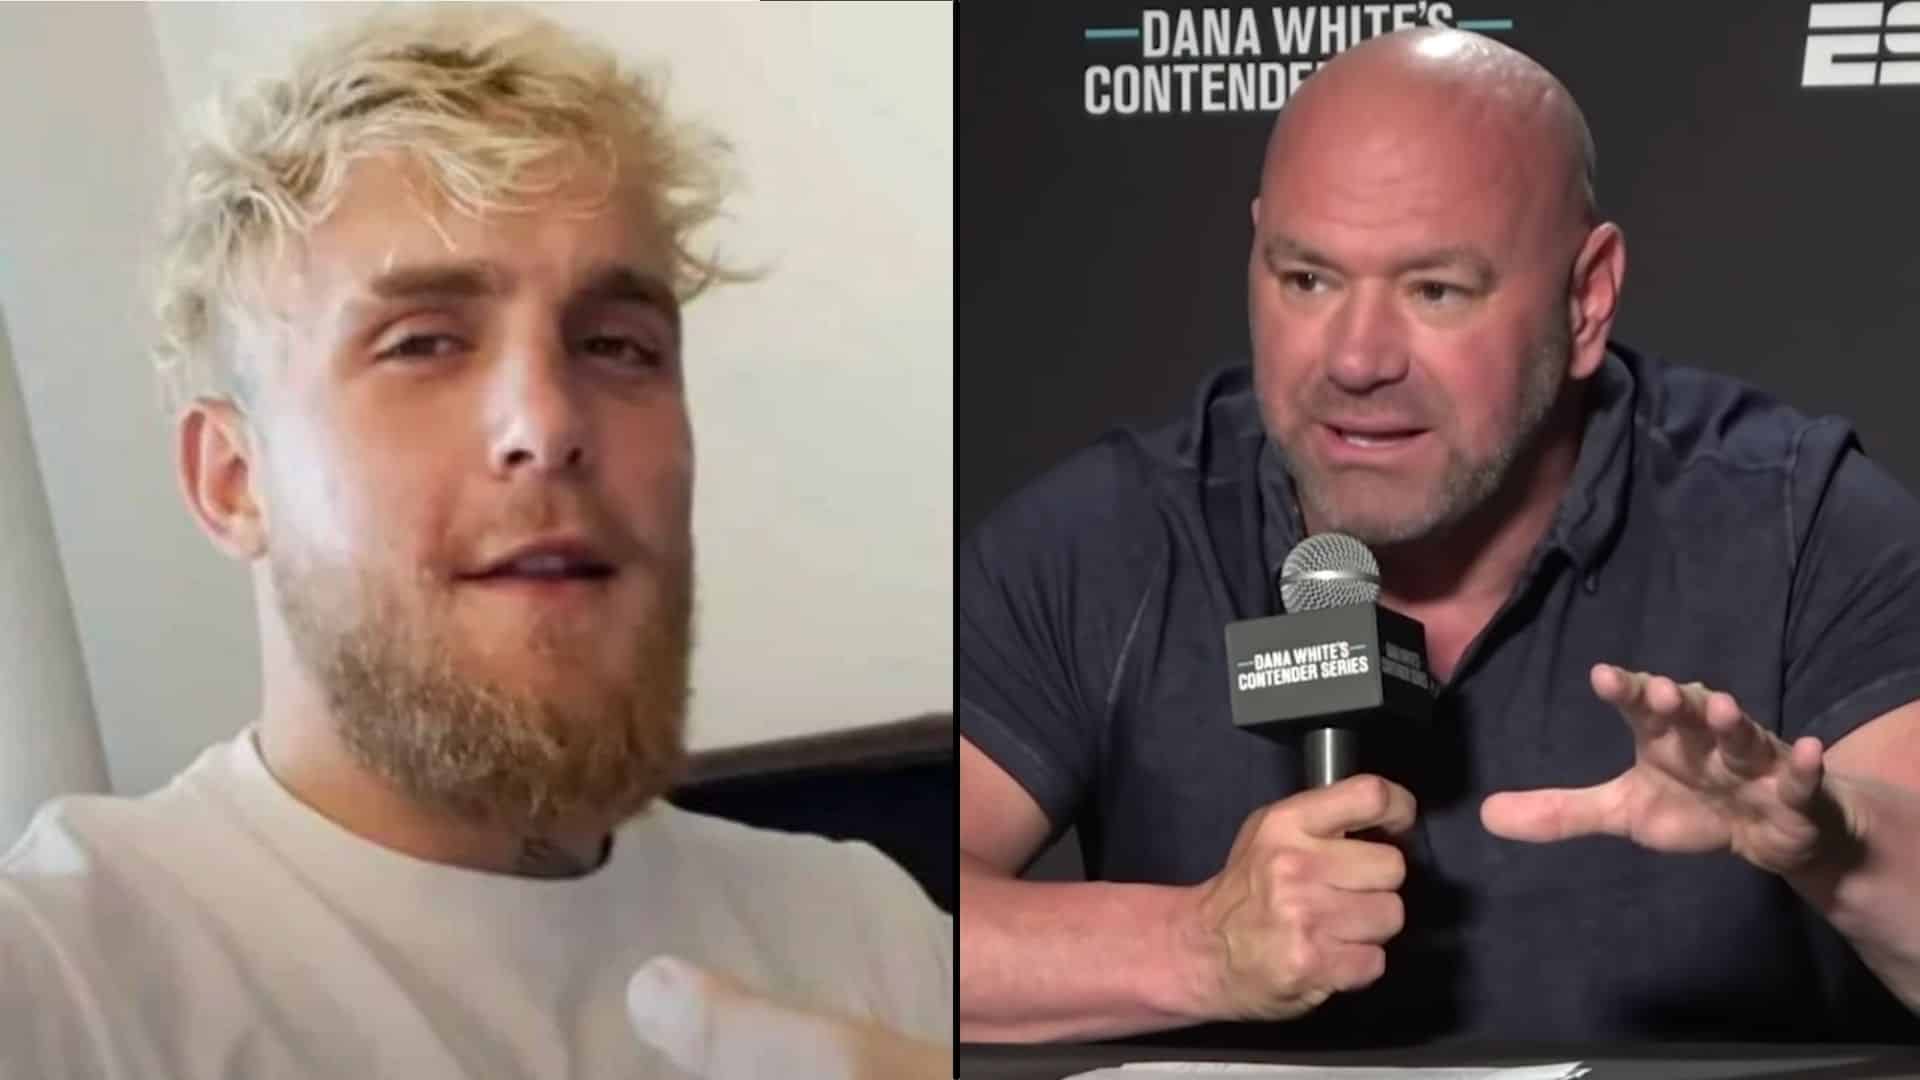 Jake Paul and Dana White side-by-side talking to cameras